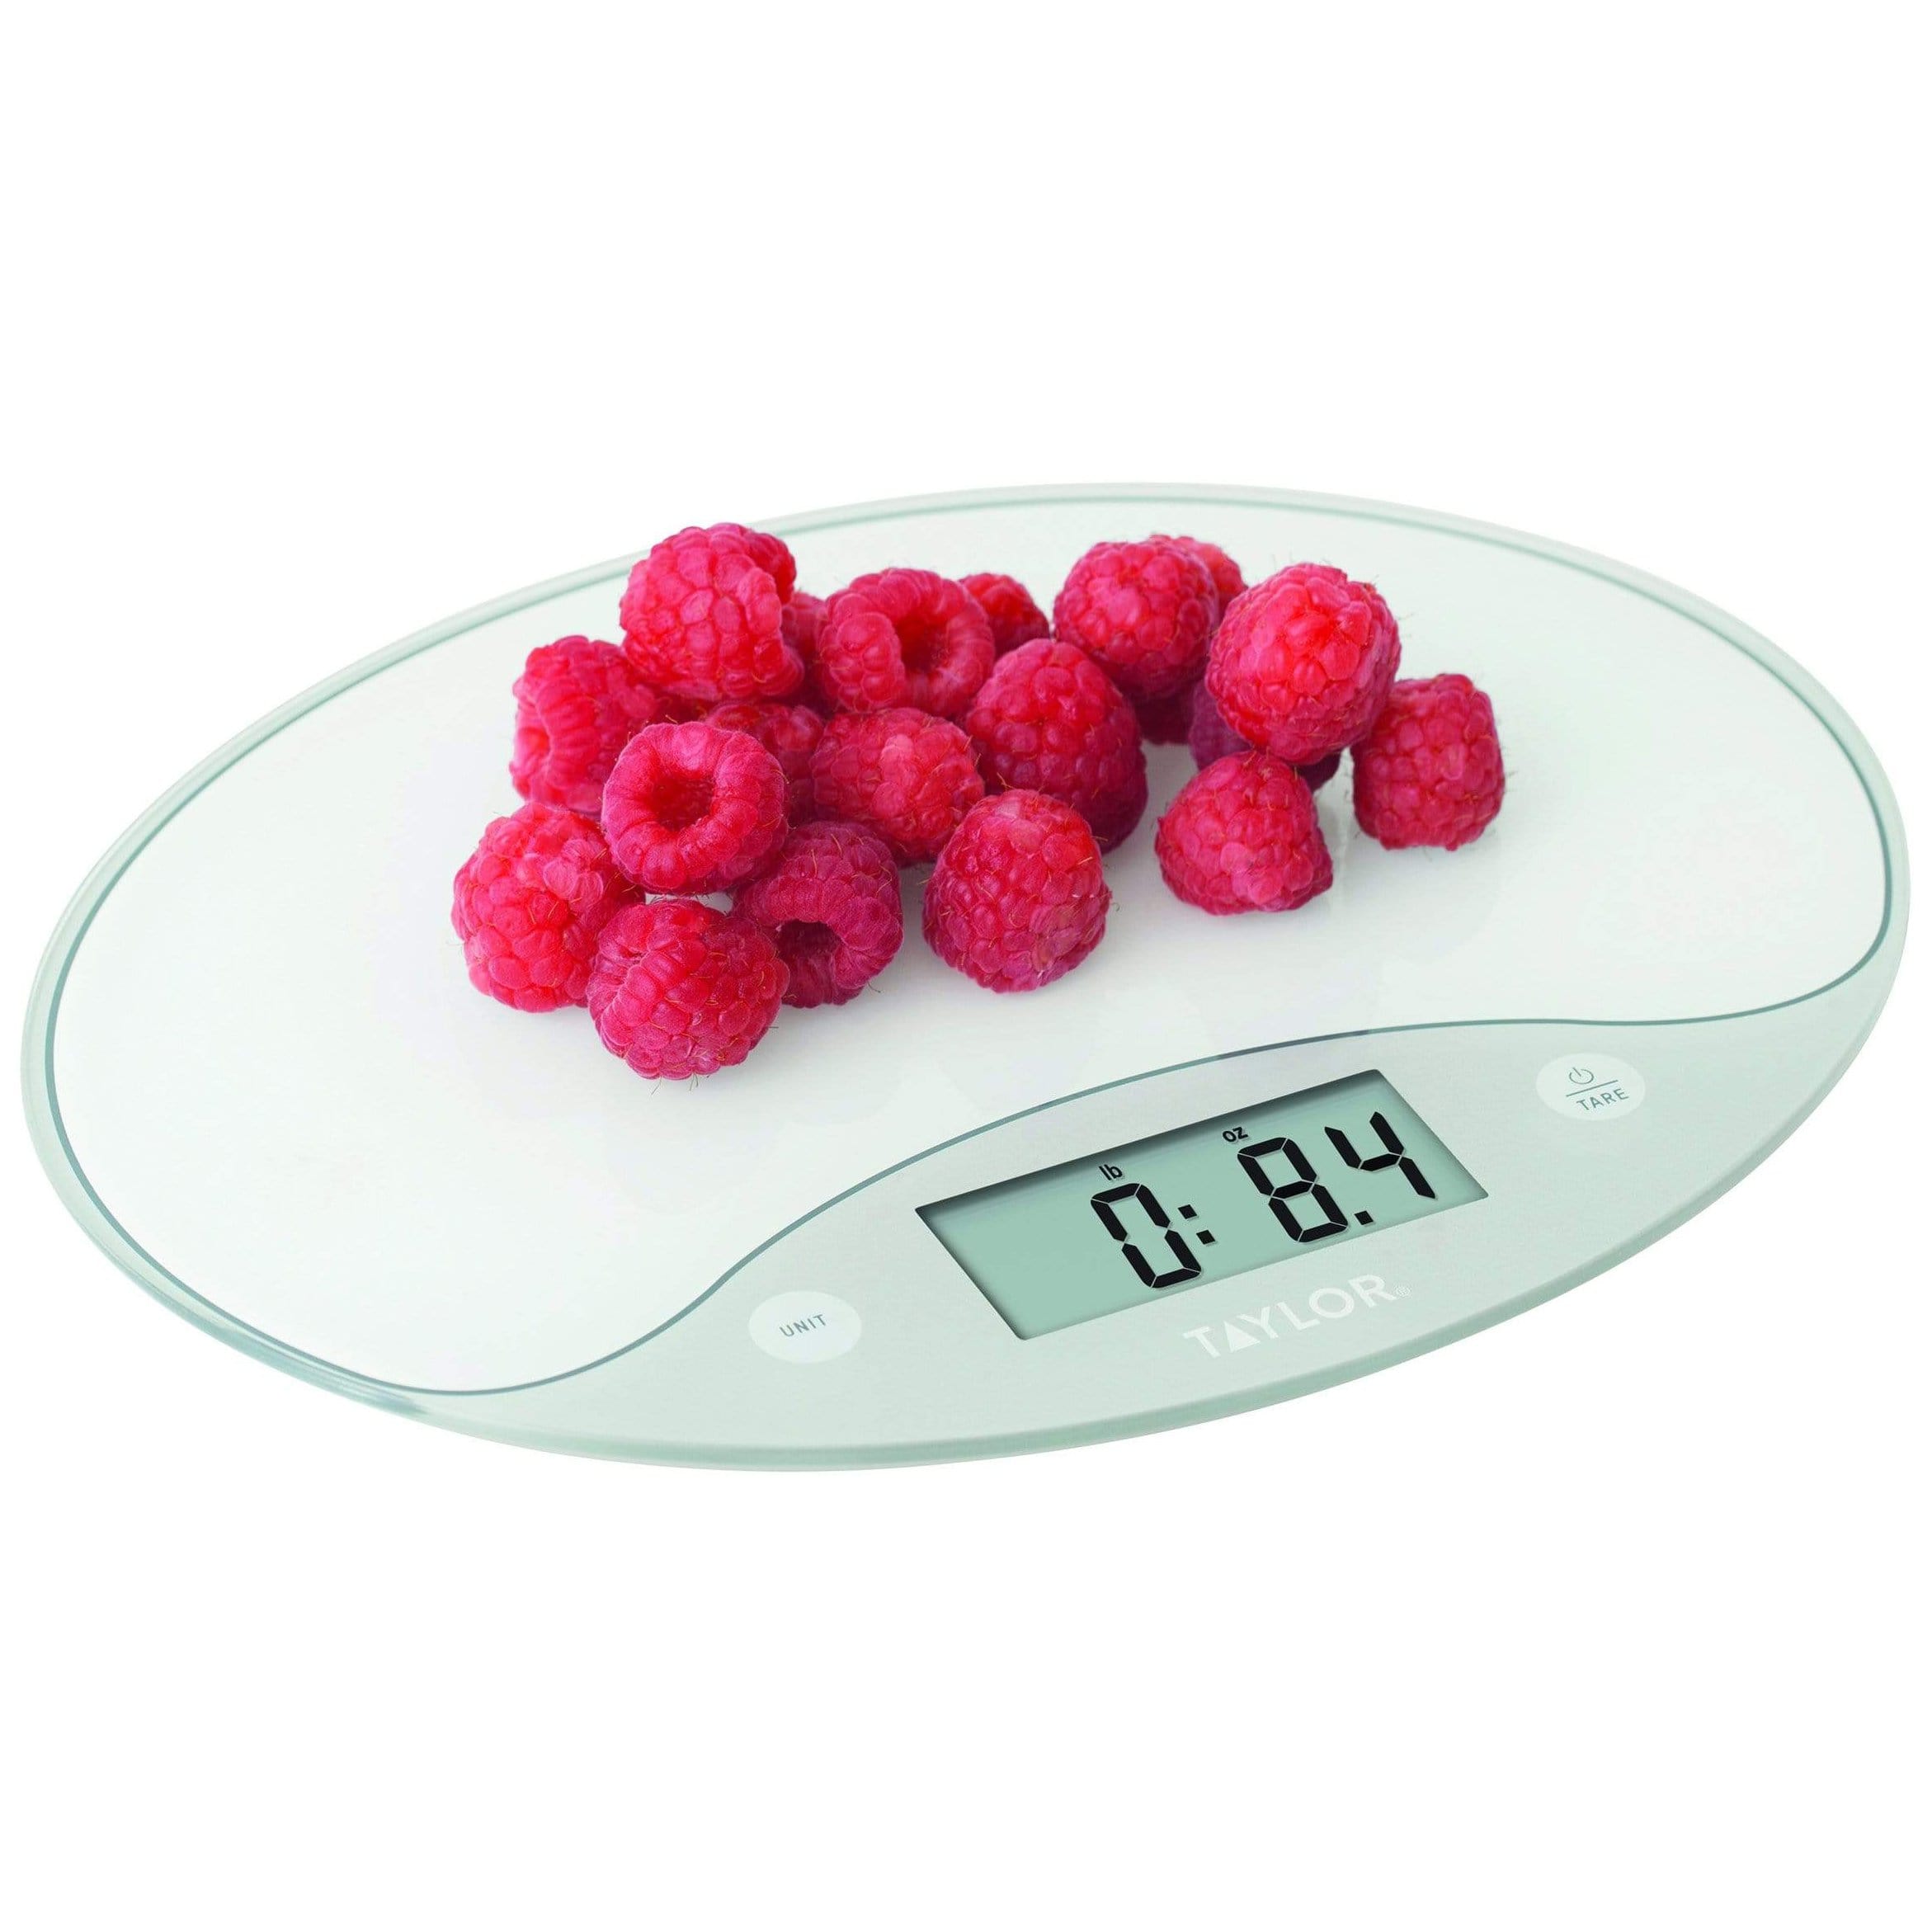 Red Ultra Thin Digital Kitchen Scale